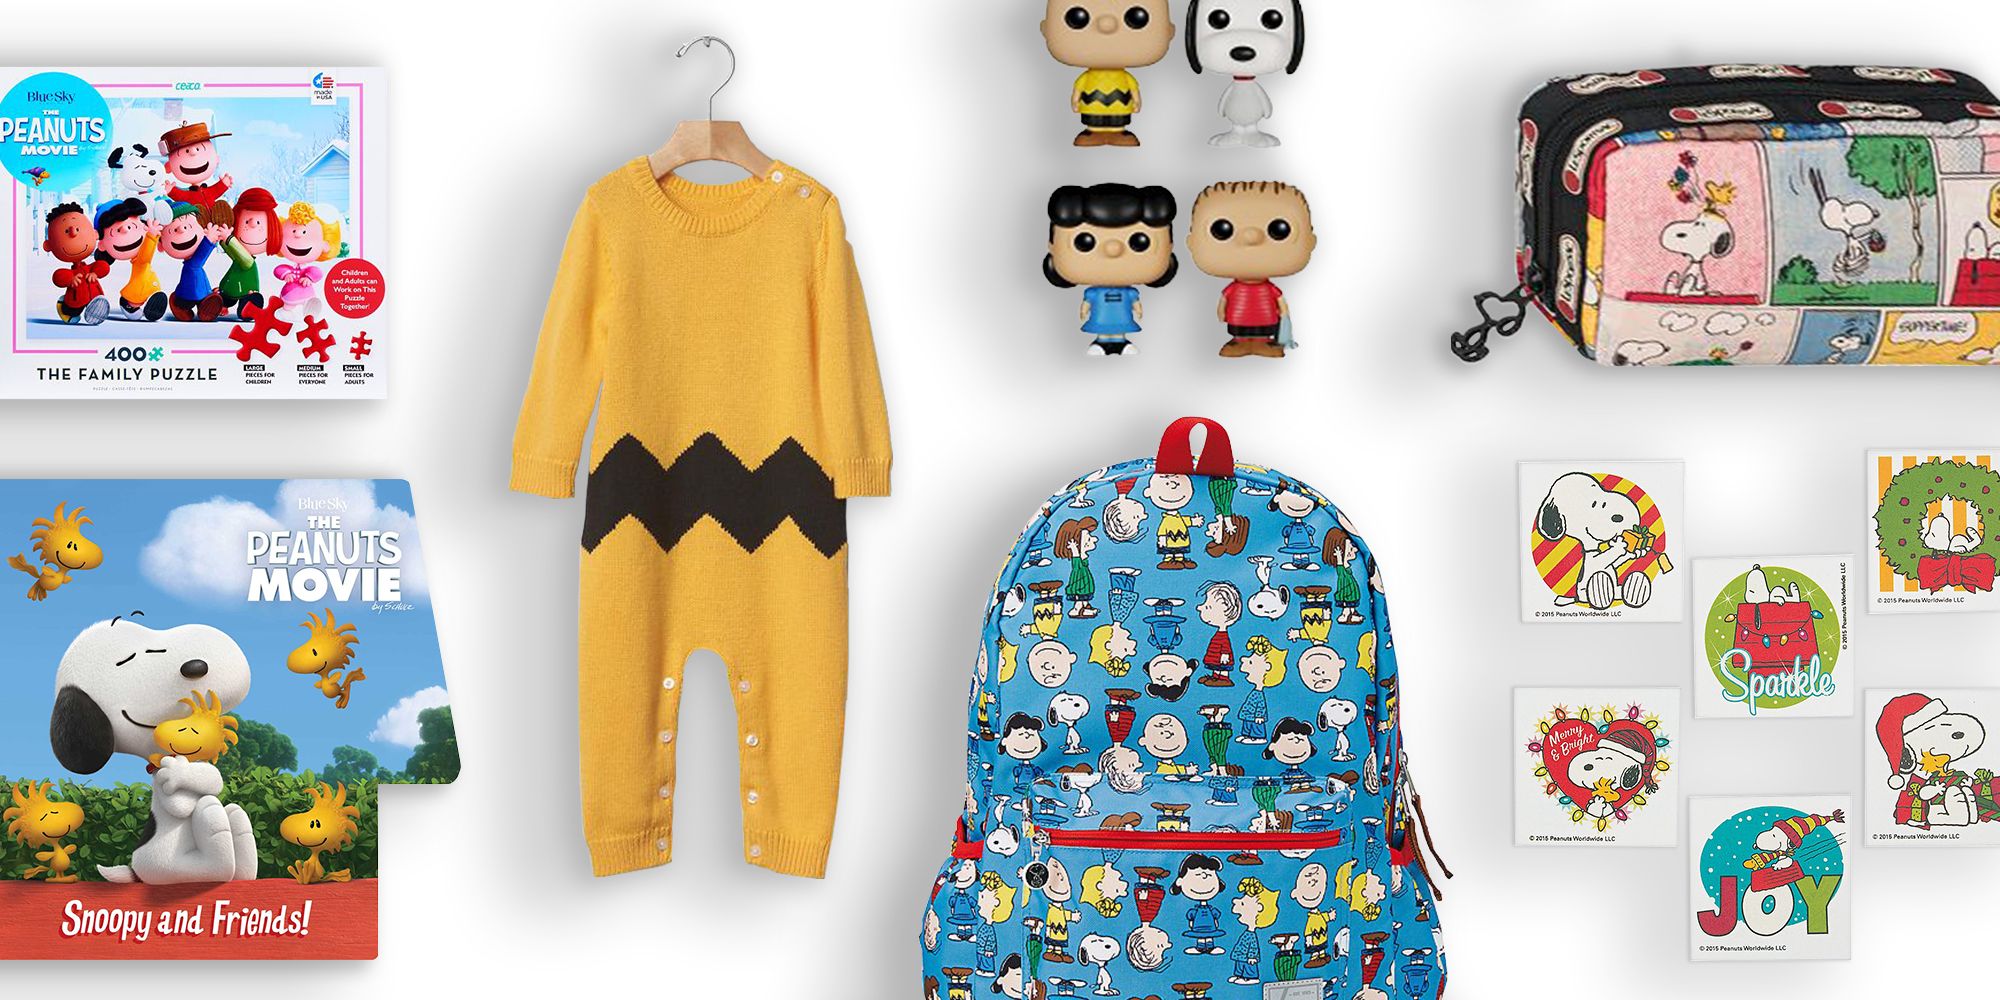 11 Best Peanuts Movie Themed Toys And Gear 2018 - Peanuts Decor And Games